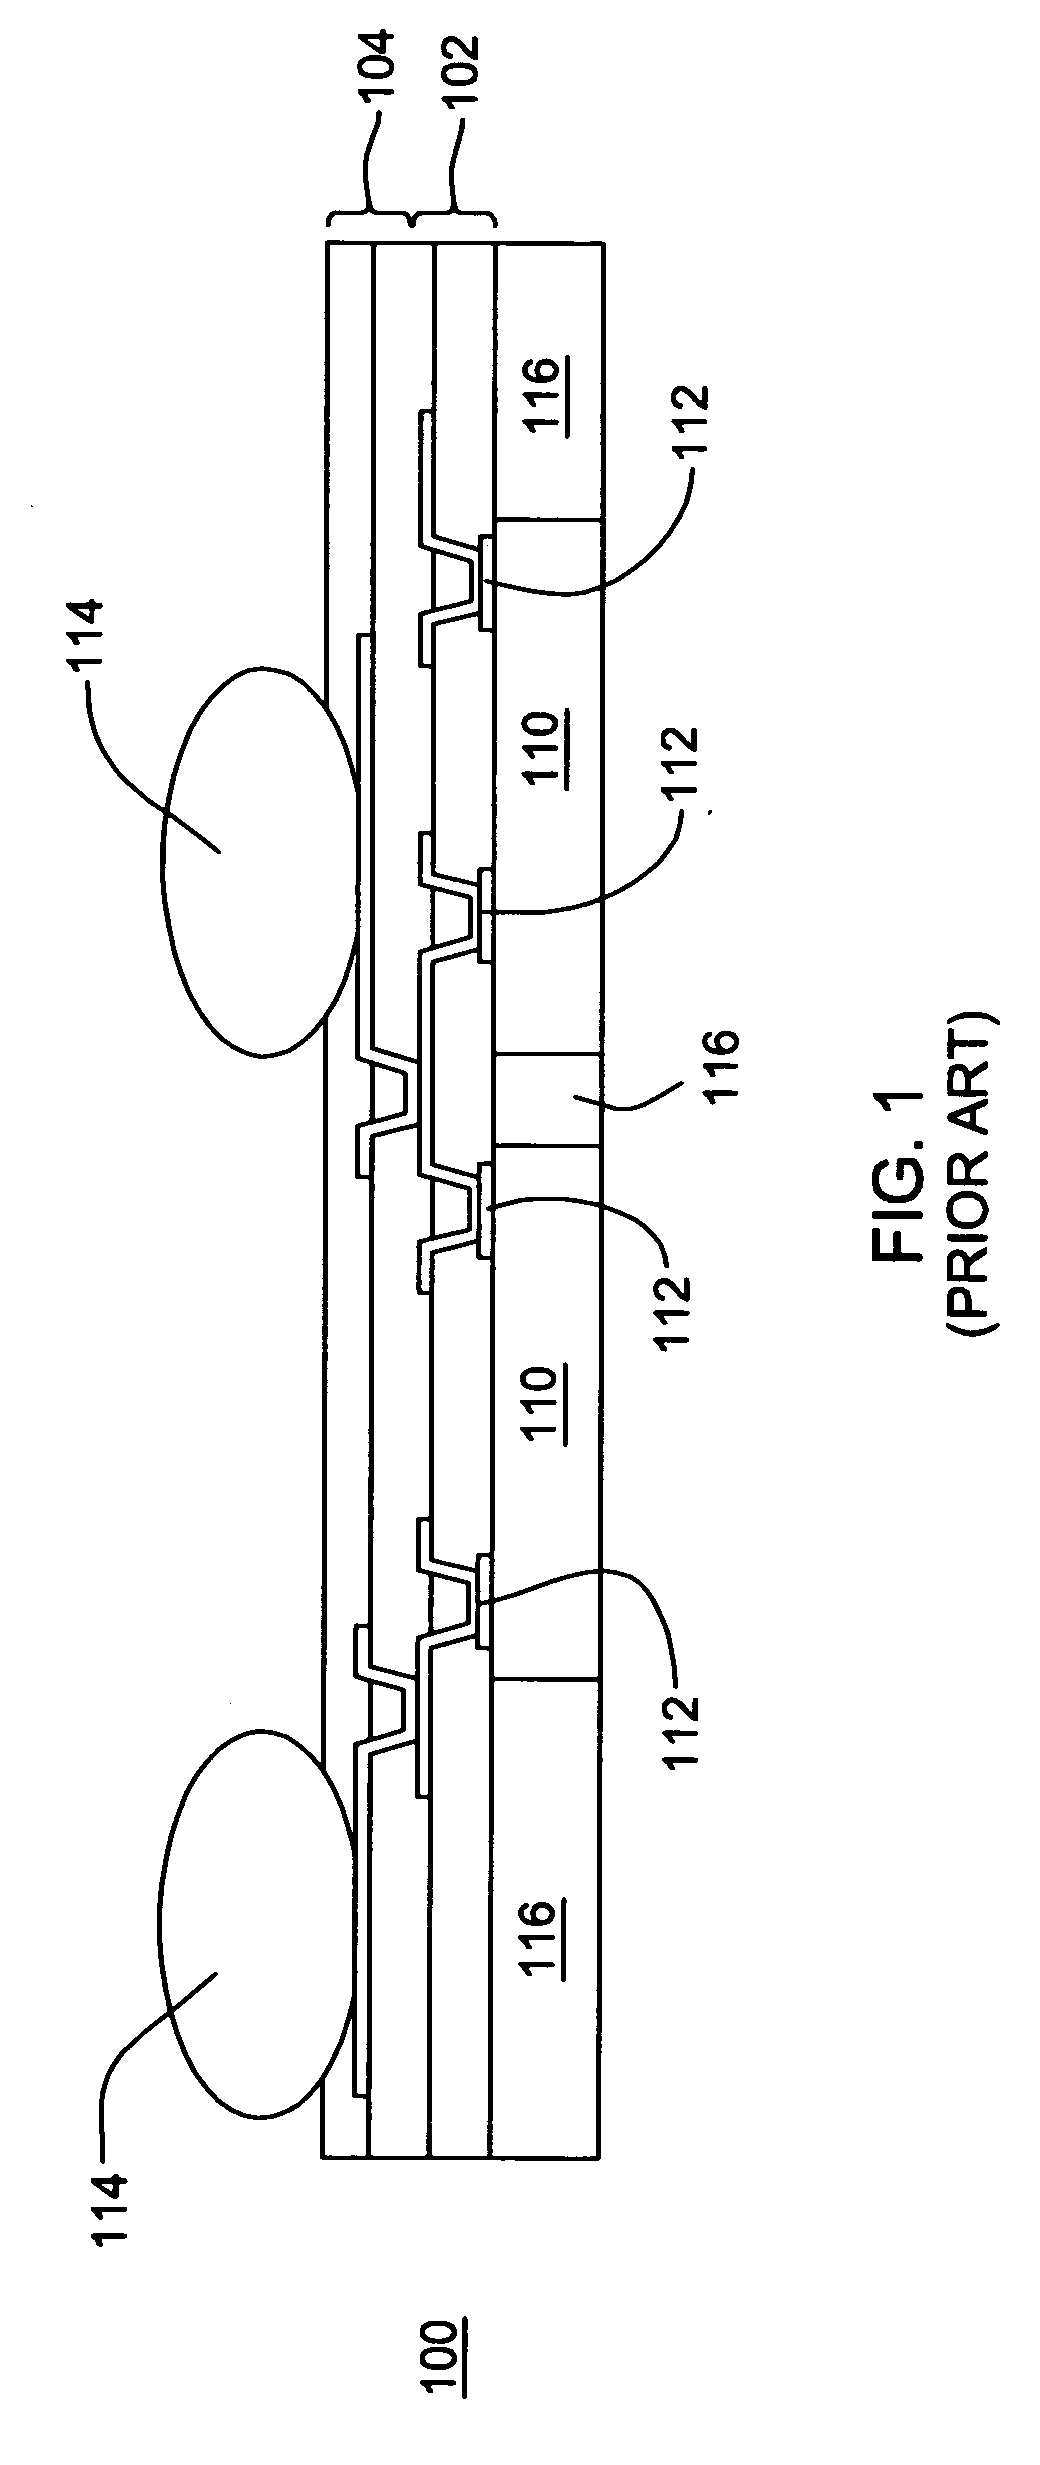 Packaged electronic modules and fabrication methods thereof implementing a cell phone or other electronic system